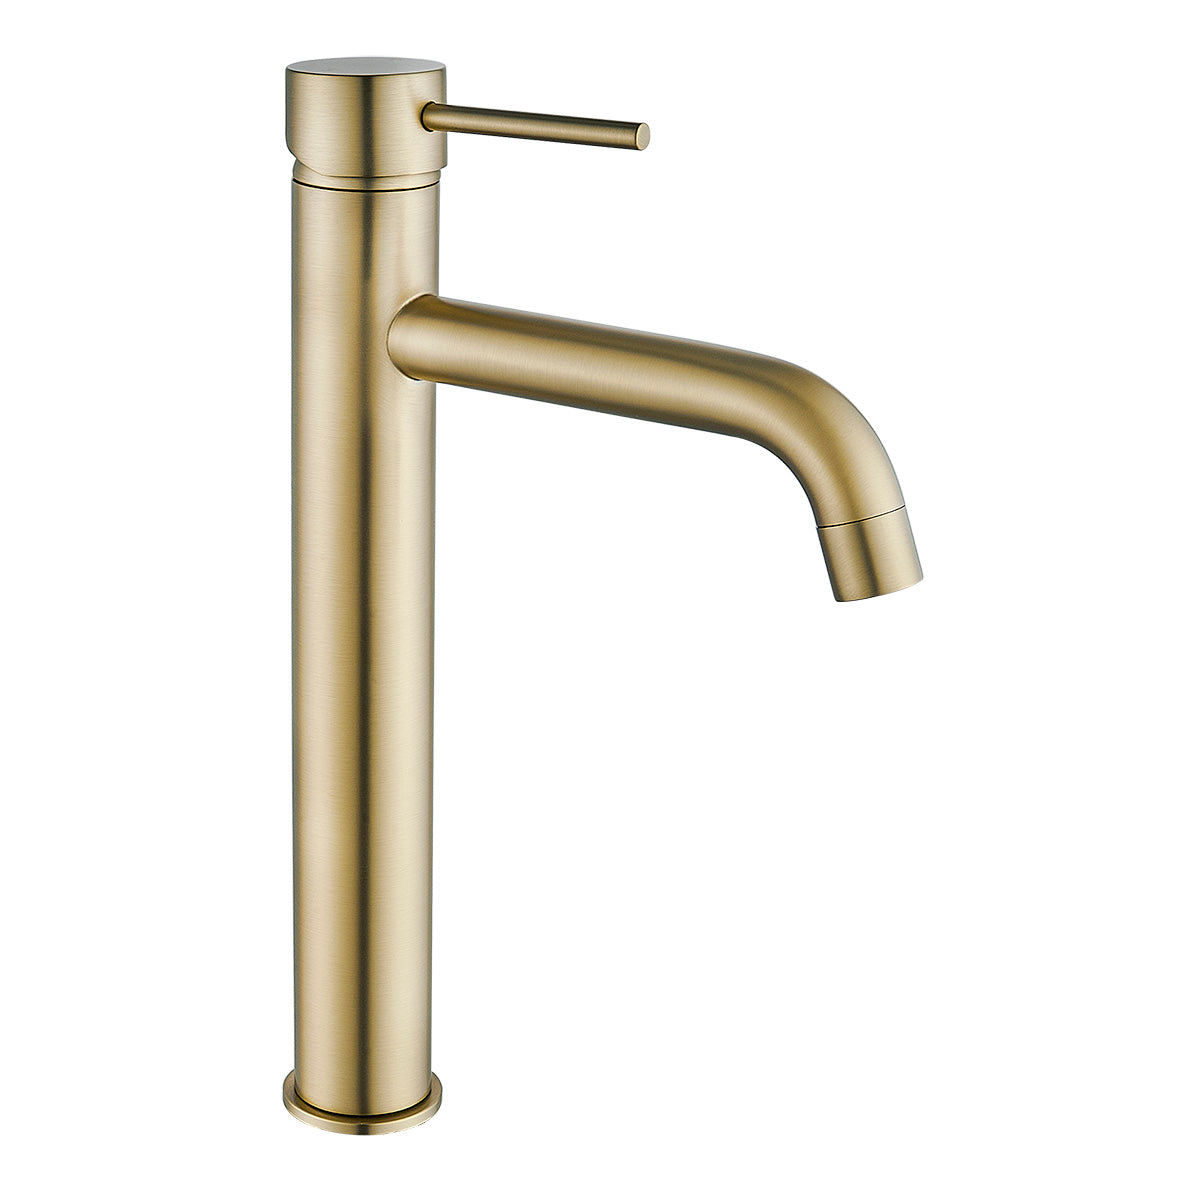 HELLYCAR IDEAL HIGH BASIN MIXER 315MM BRUSHED GOLD